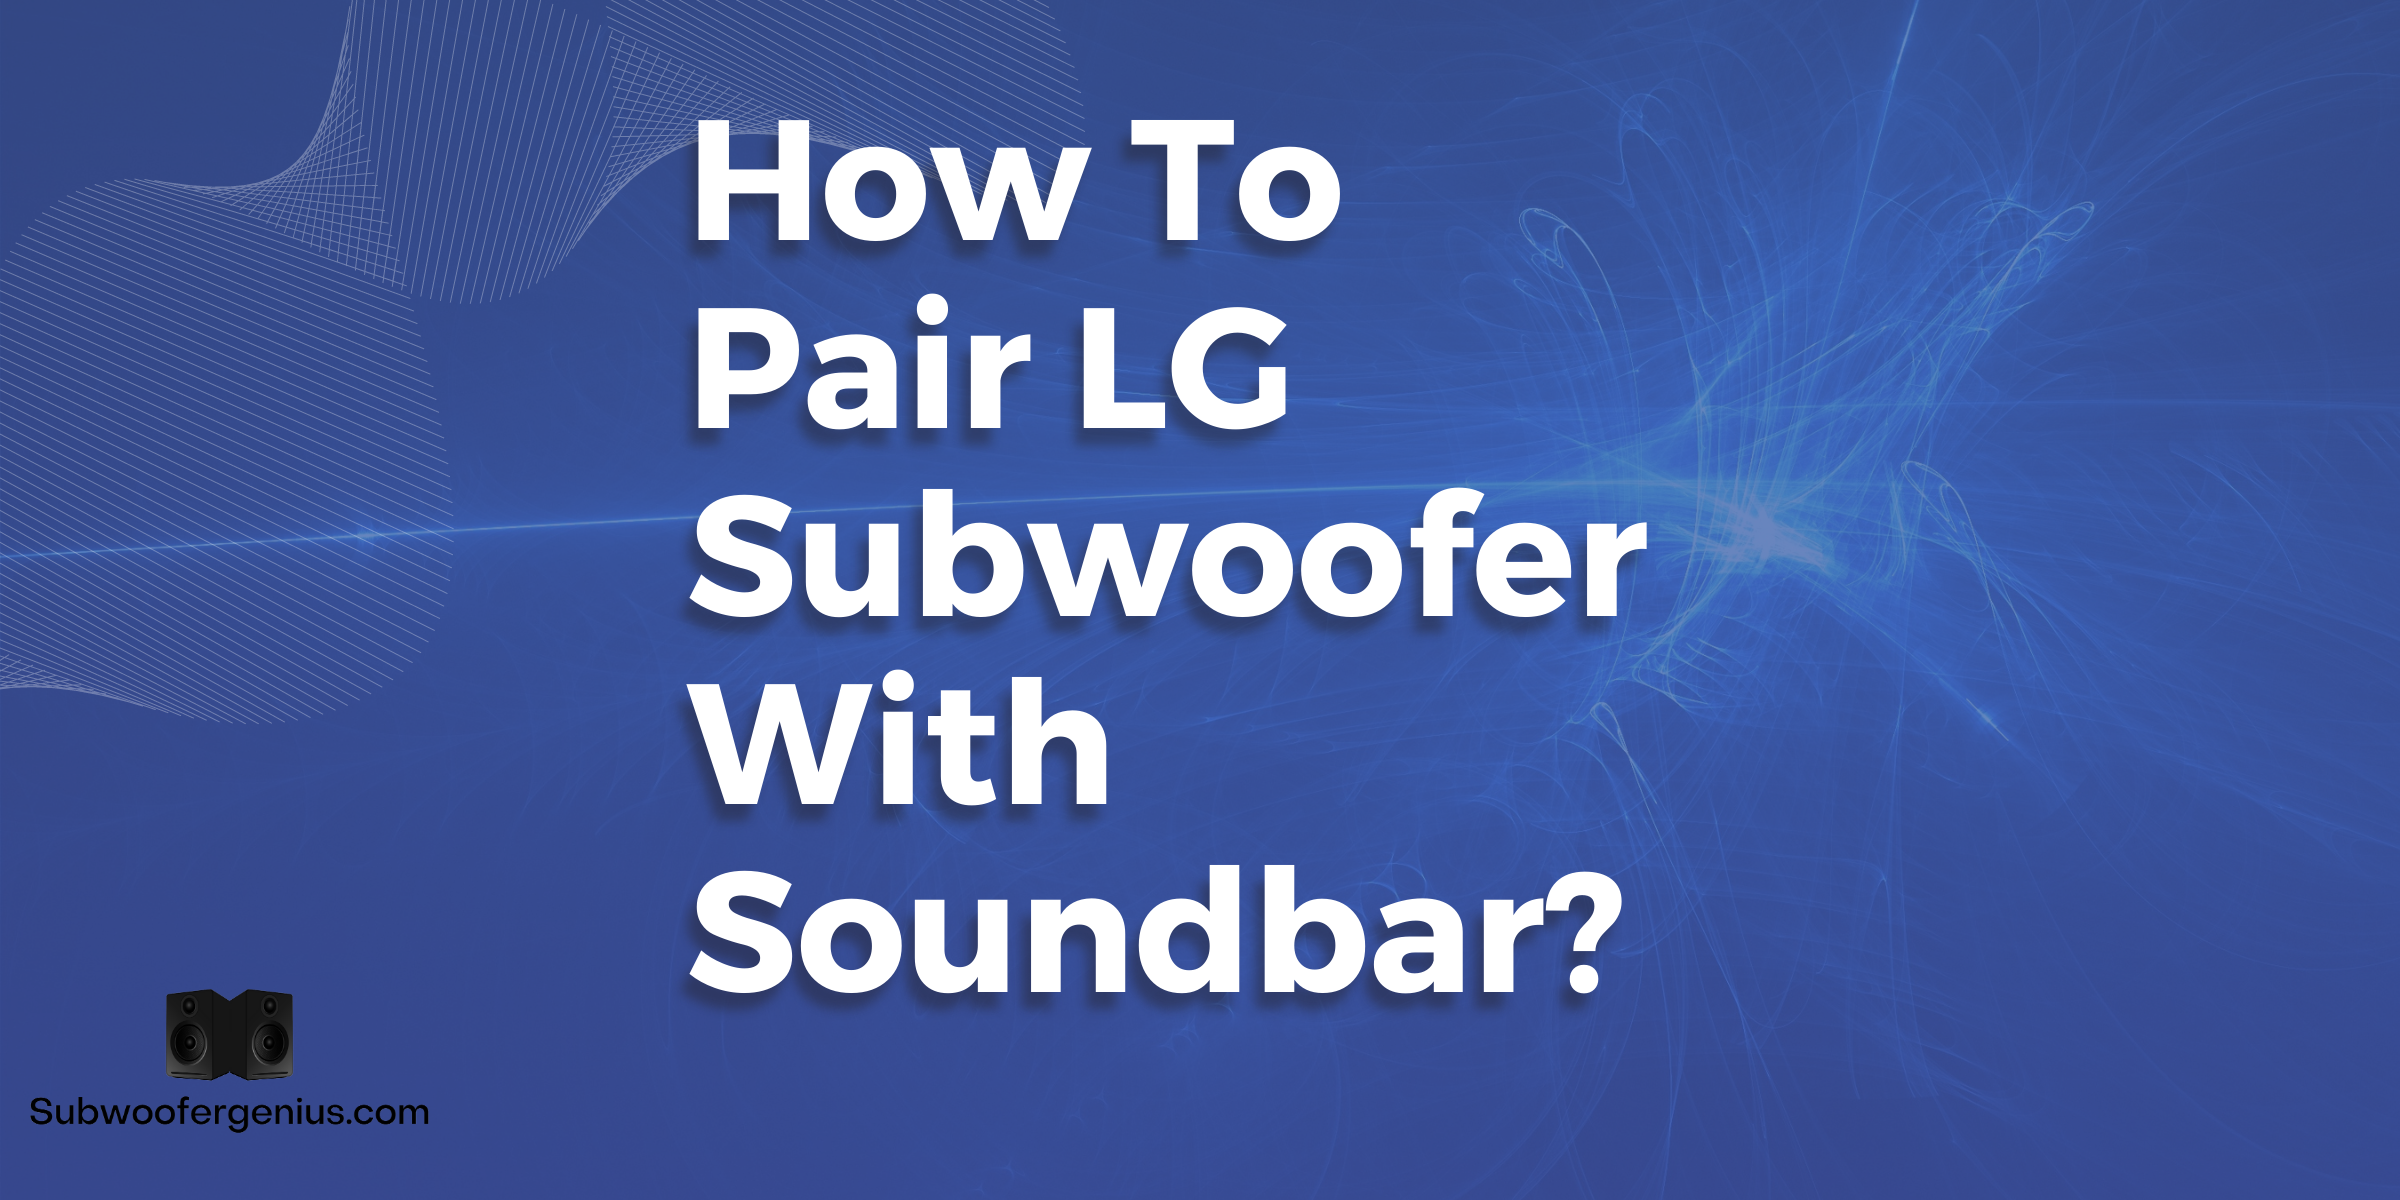 Pair LG sound bar with subwoofer